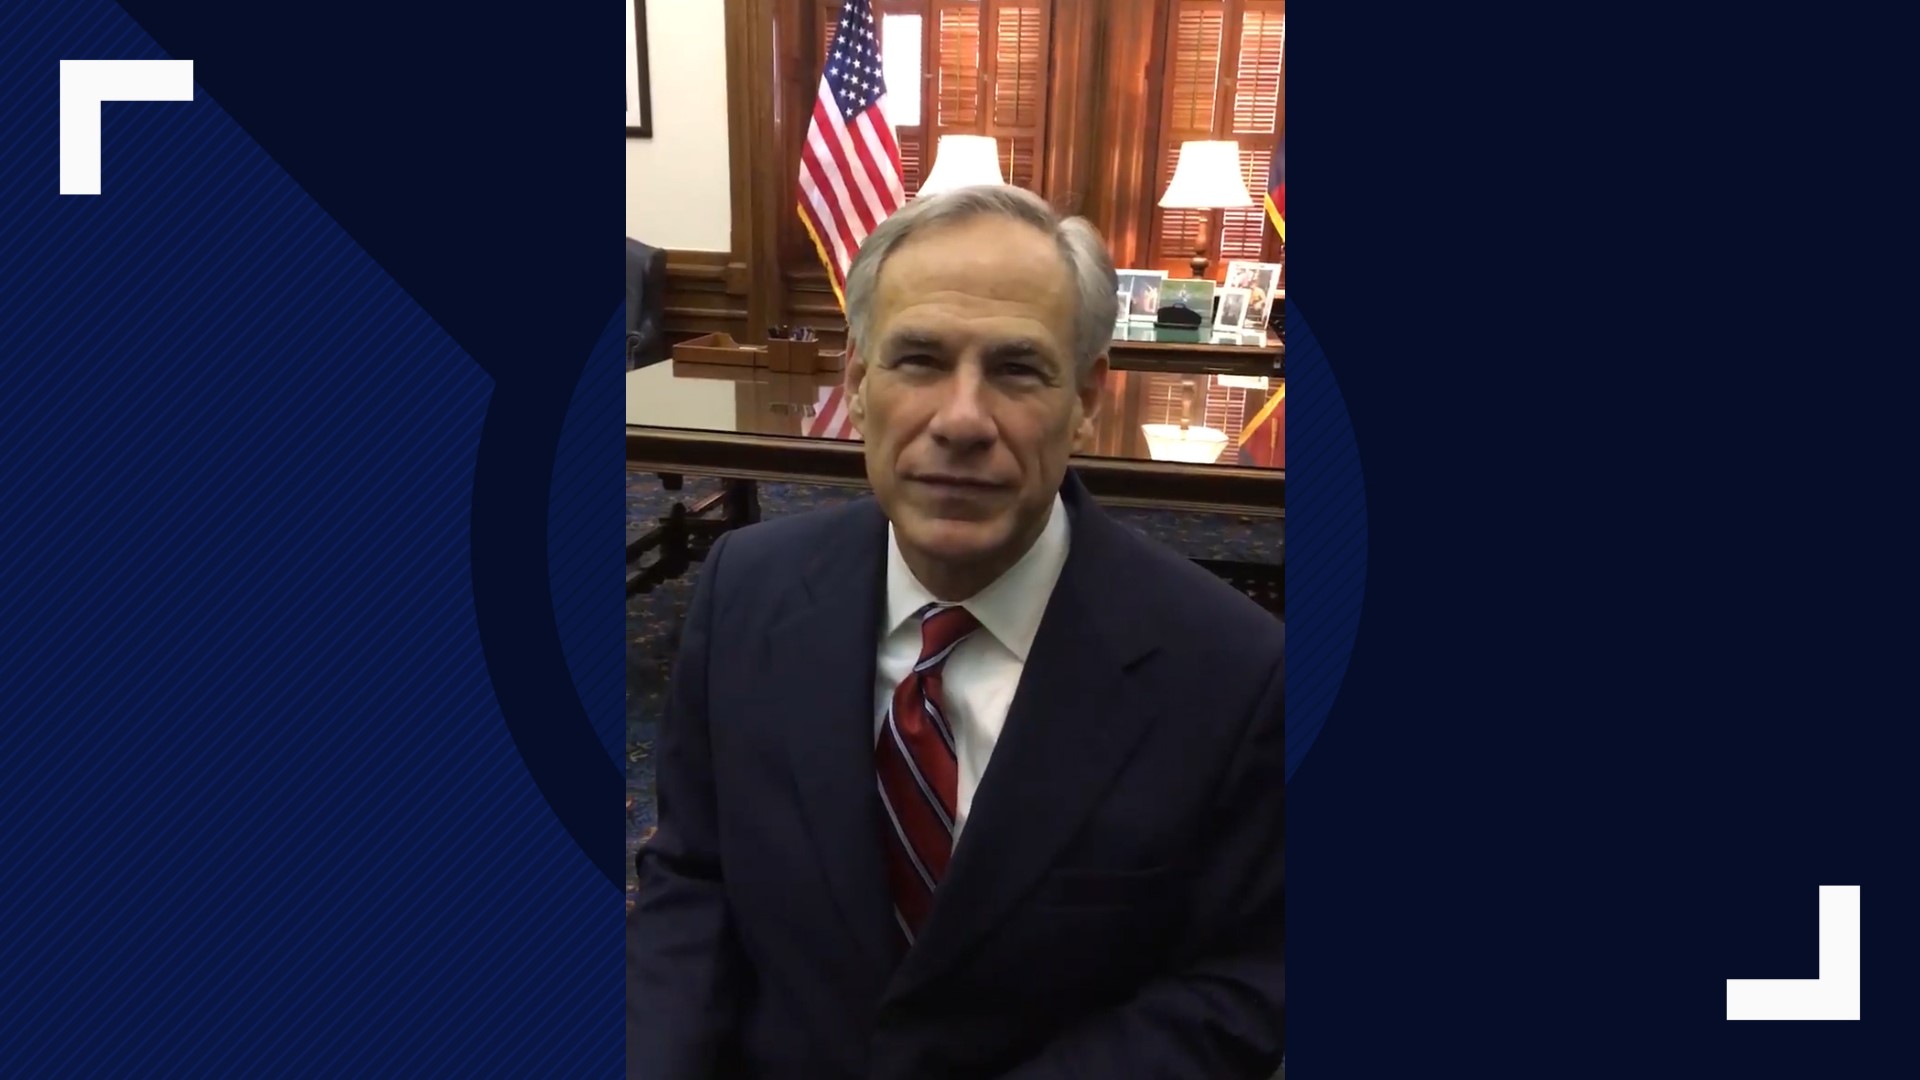 A special message from Governor Greg Abbott was shared Tuesday on the Premont Independent School District Facebook page after the district's performance was highlighted during his State of the State Address.